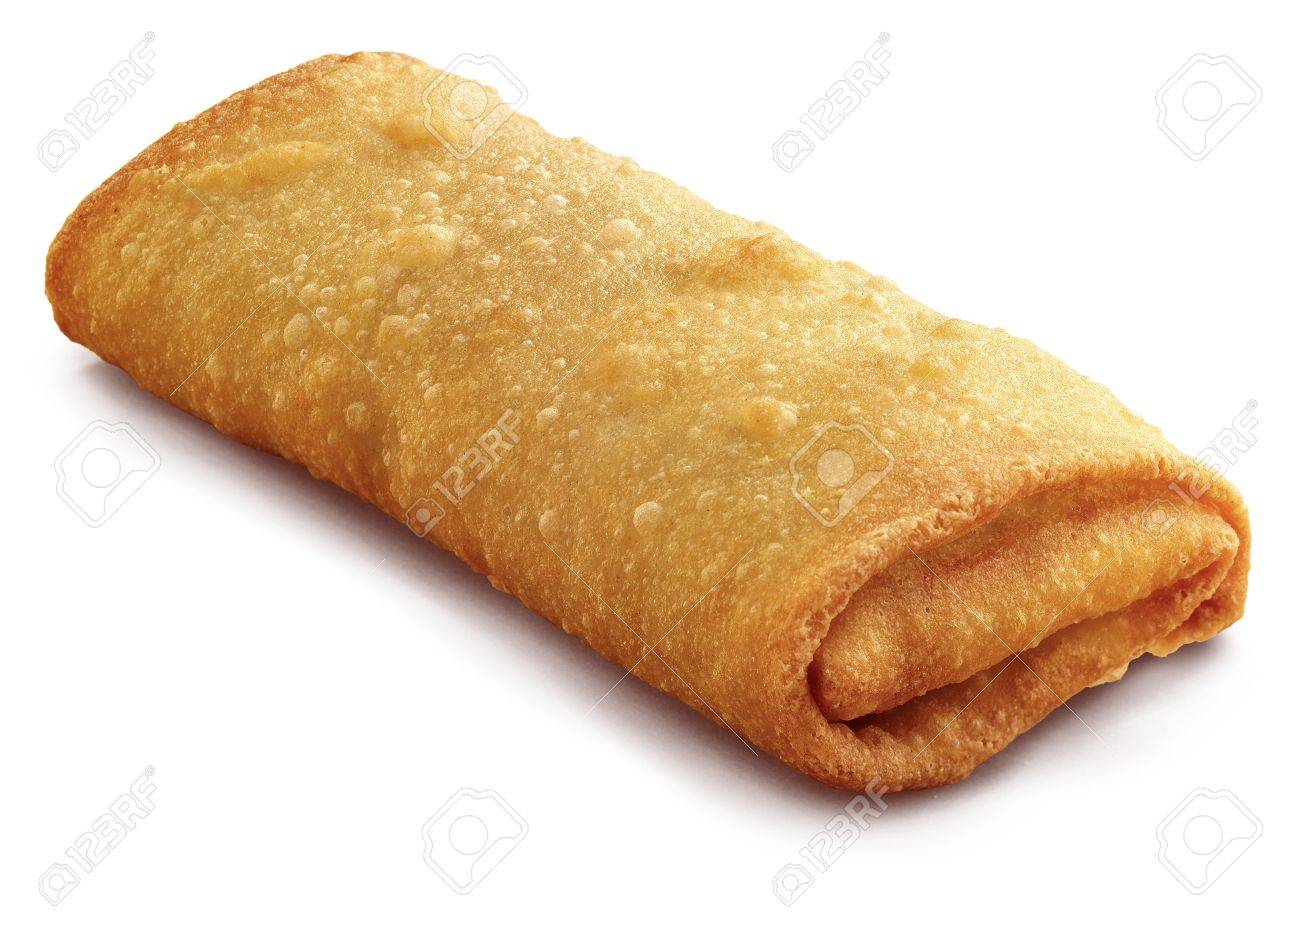 Egg Roll On A White Background Stock Photo Picture And Royalty